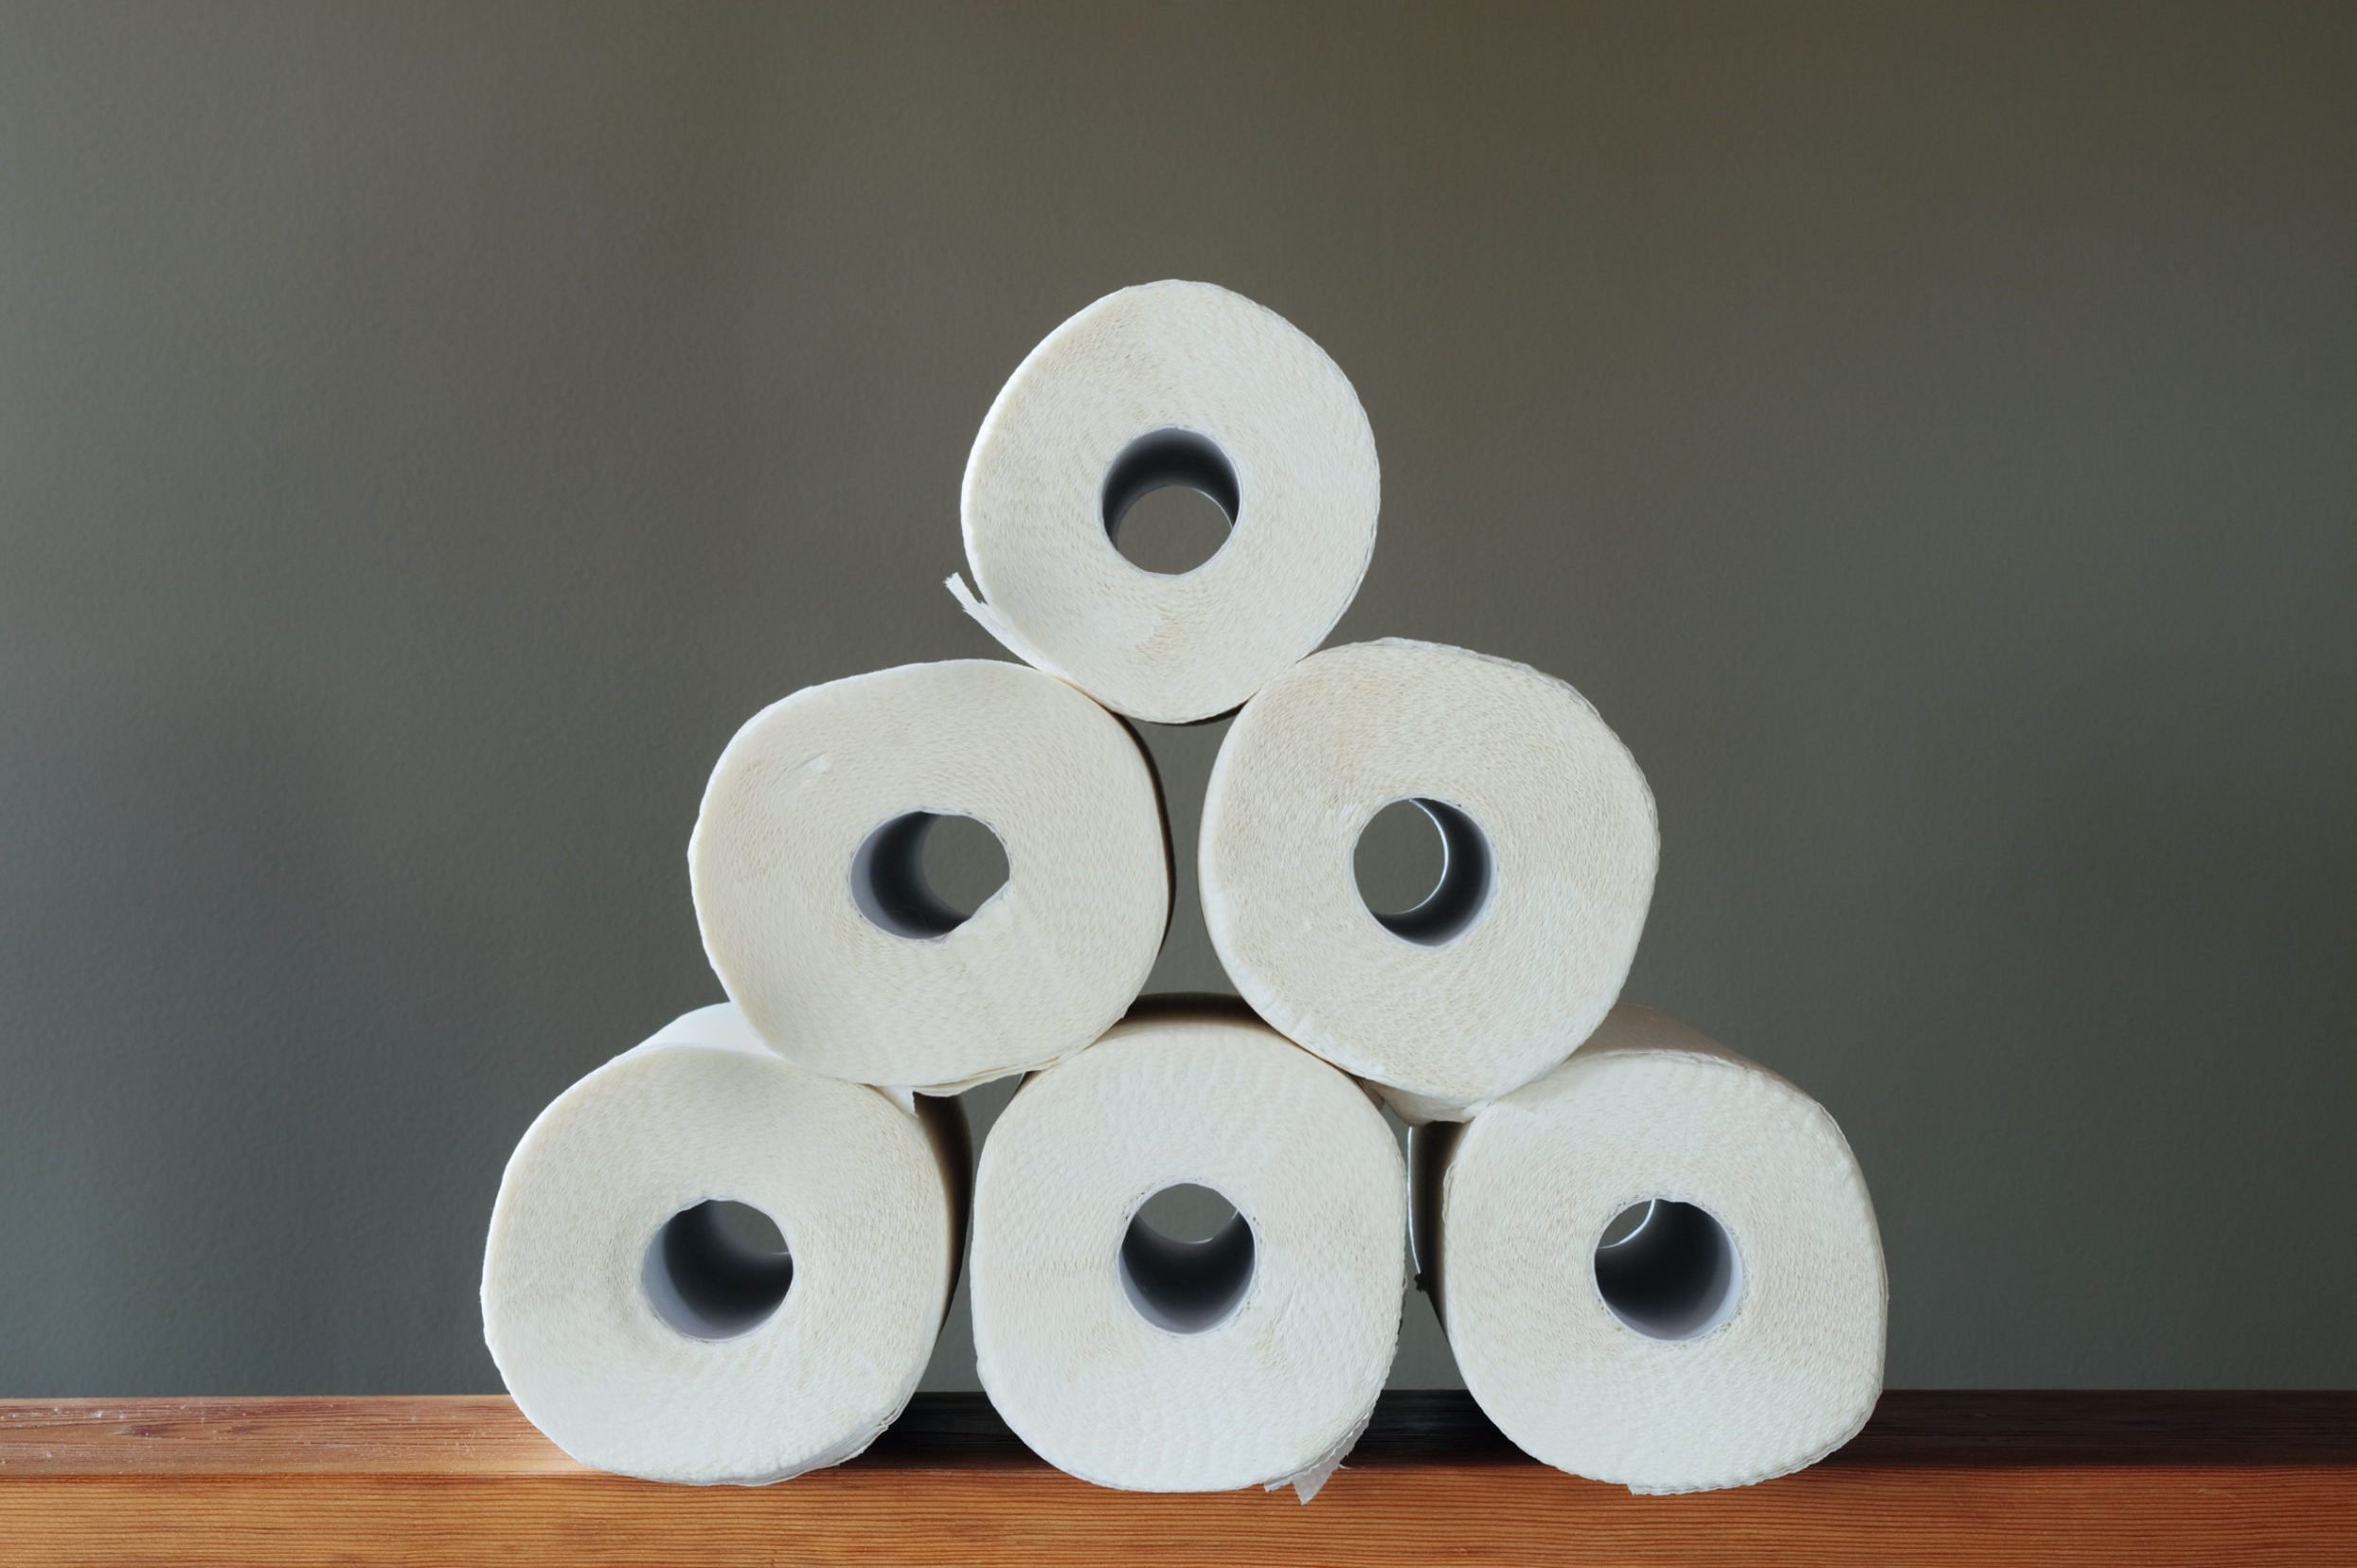 How To Make Reusable Paper Towels - Use Fabric Scraps 